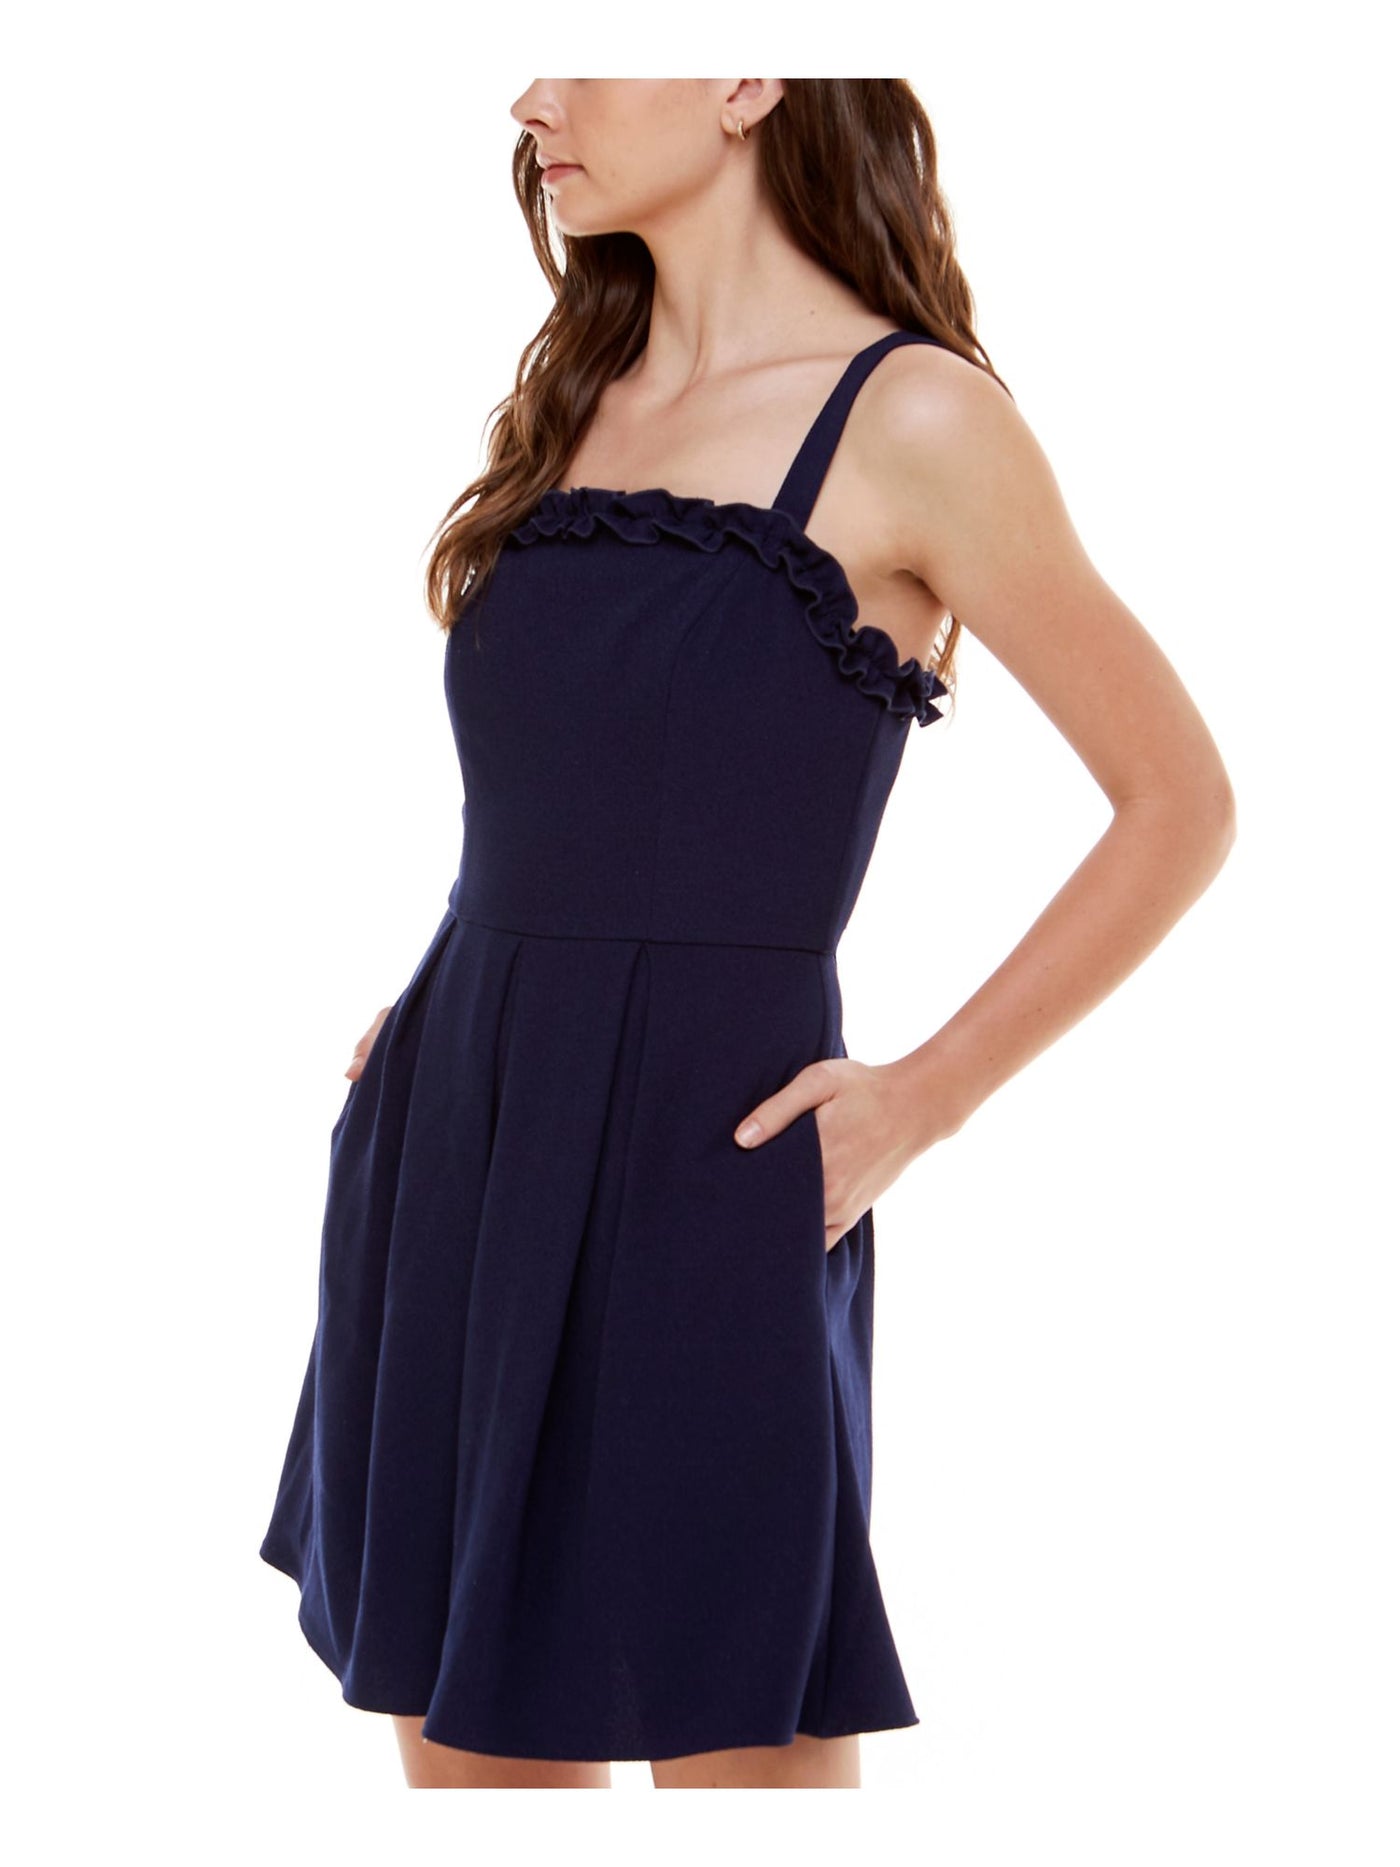 SPEECHLESS Womens Navy Stretch Zippered Pocketed Ruffled Pleated Sleeveless Square Neck Mini Party Fit + Flare Dress Juniors XS